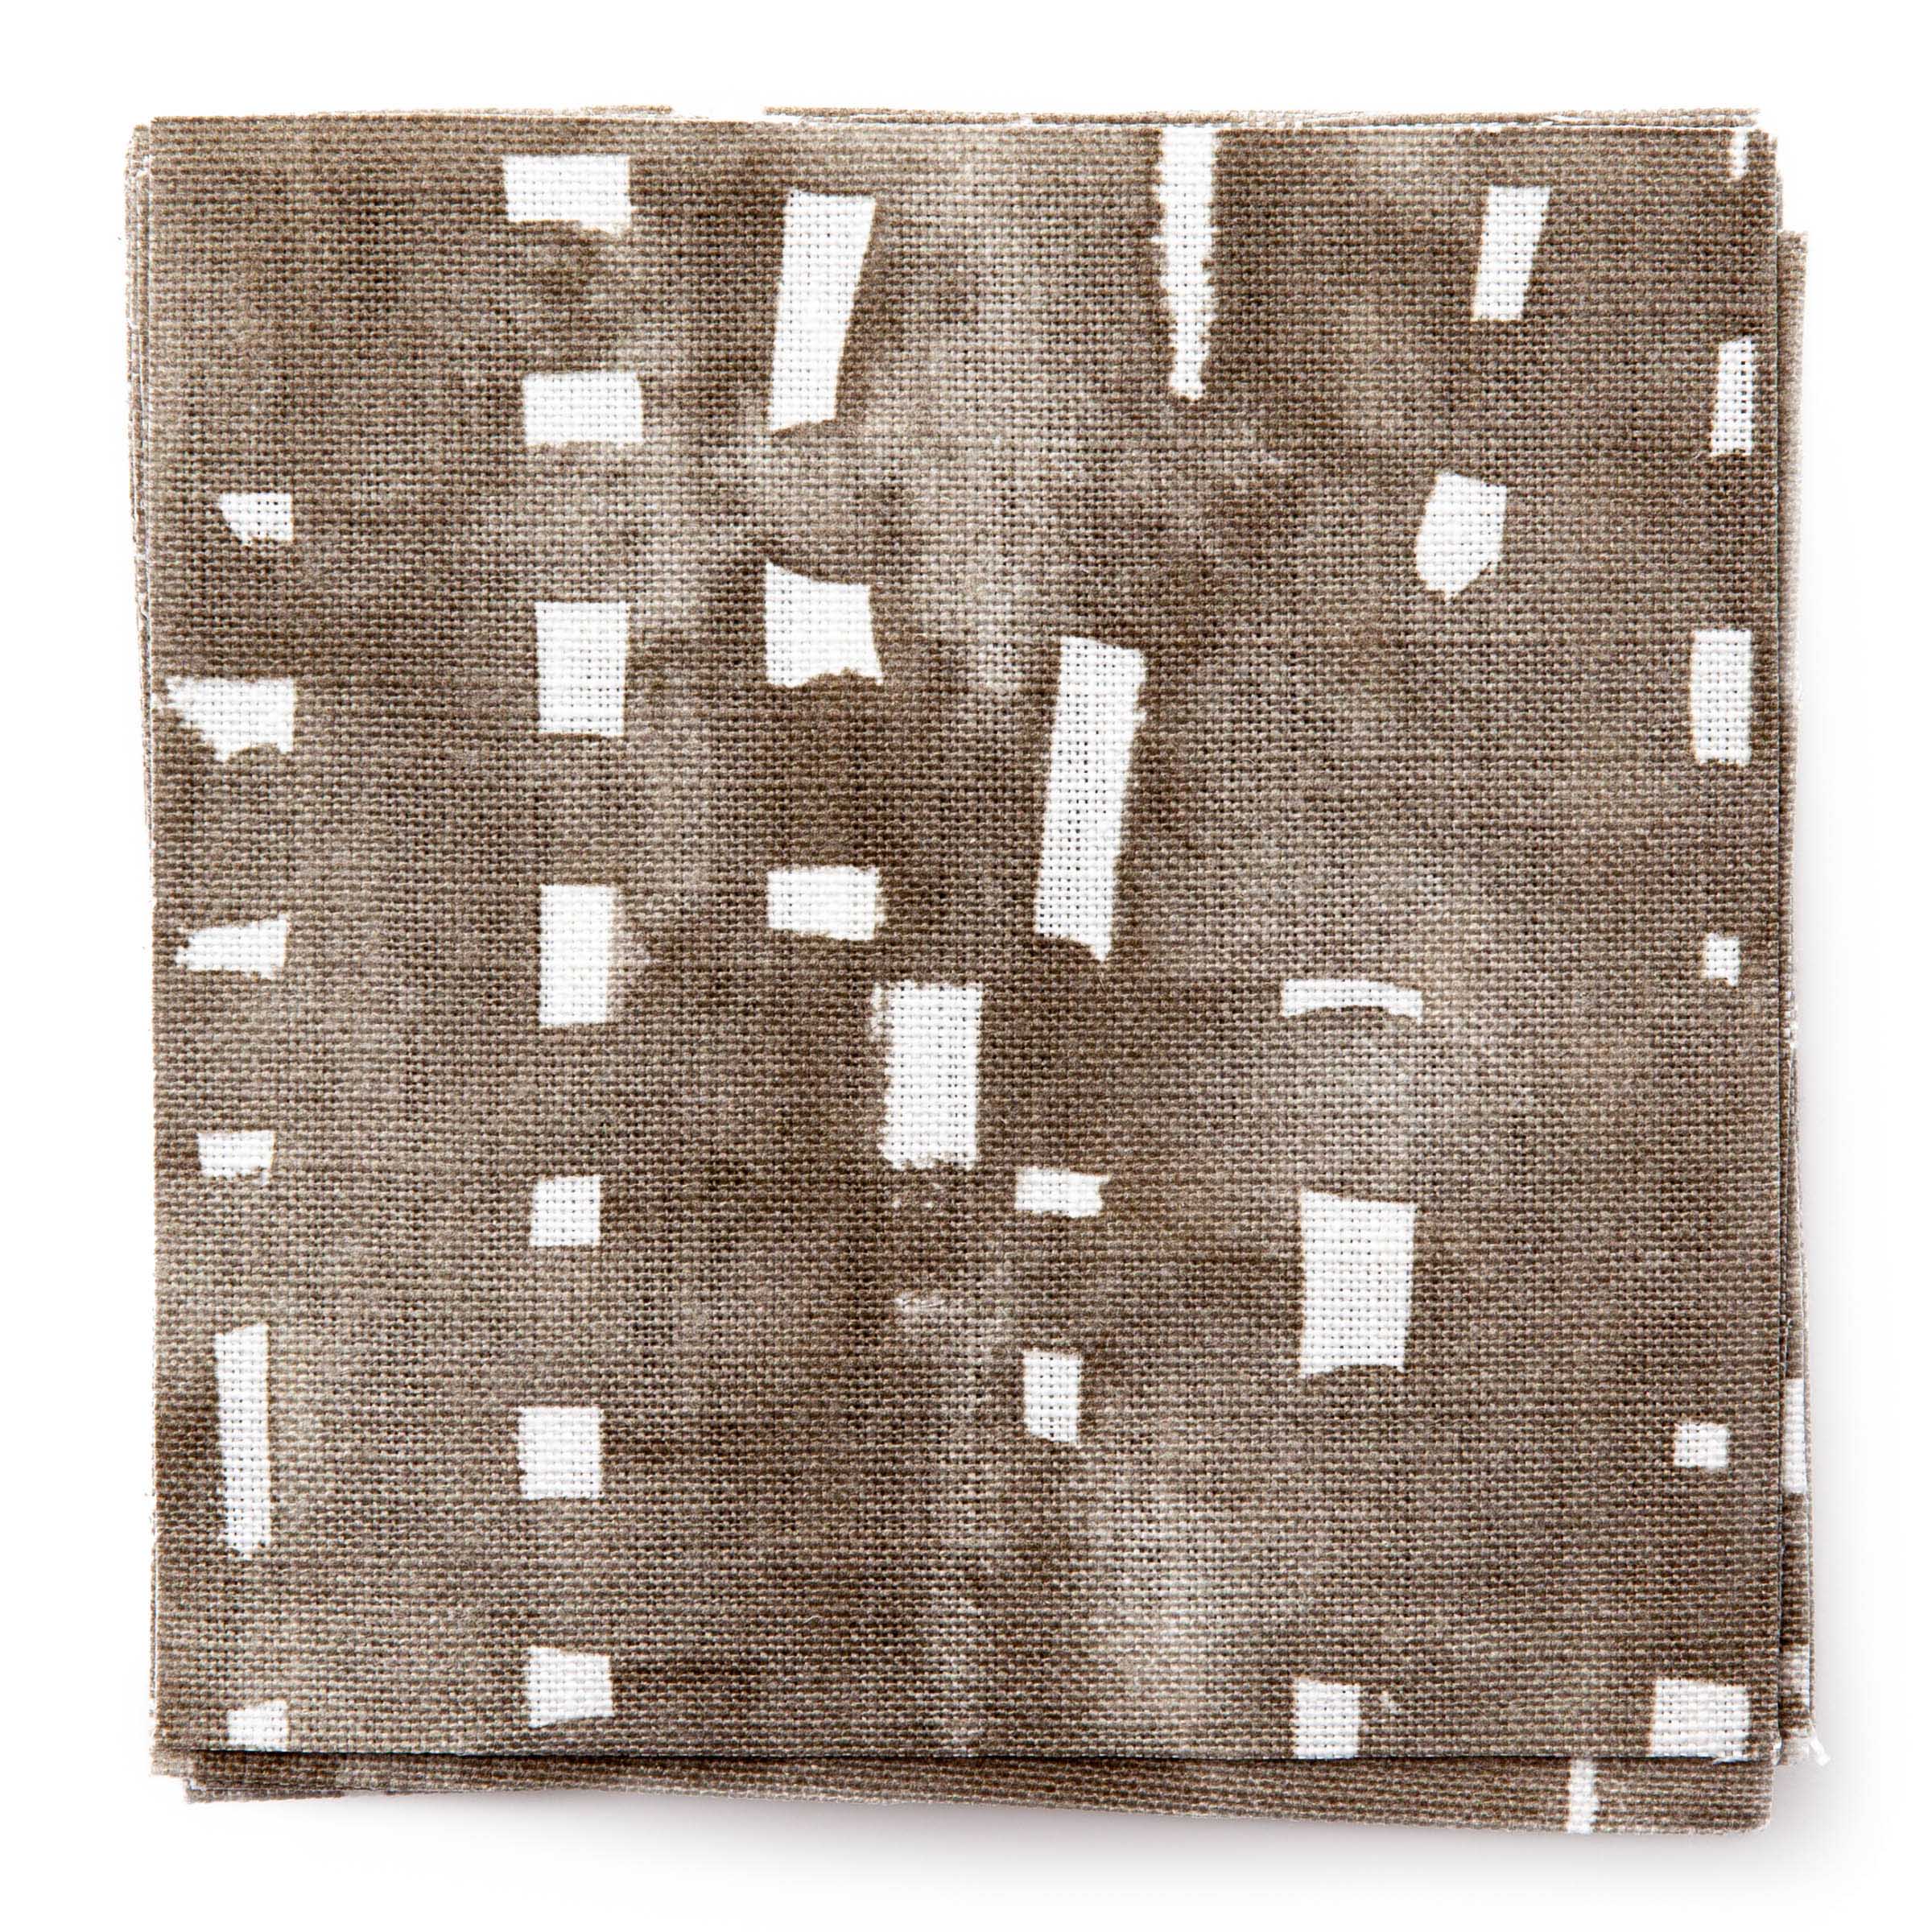 A stack of fabric swatches in a painterly small-scale grid print in brown on a white field.